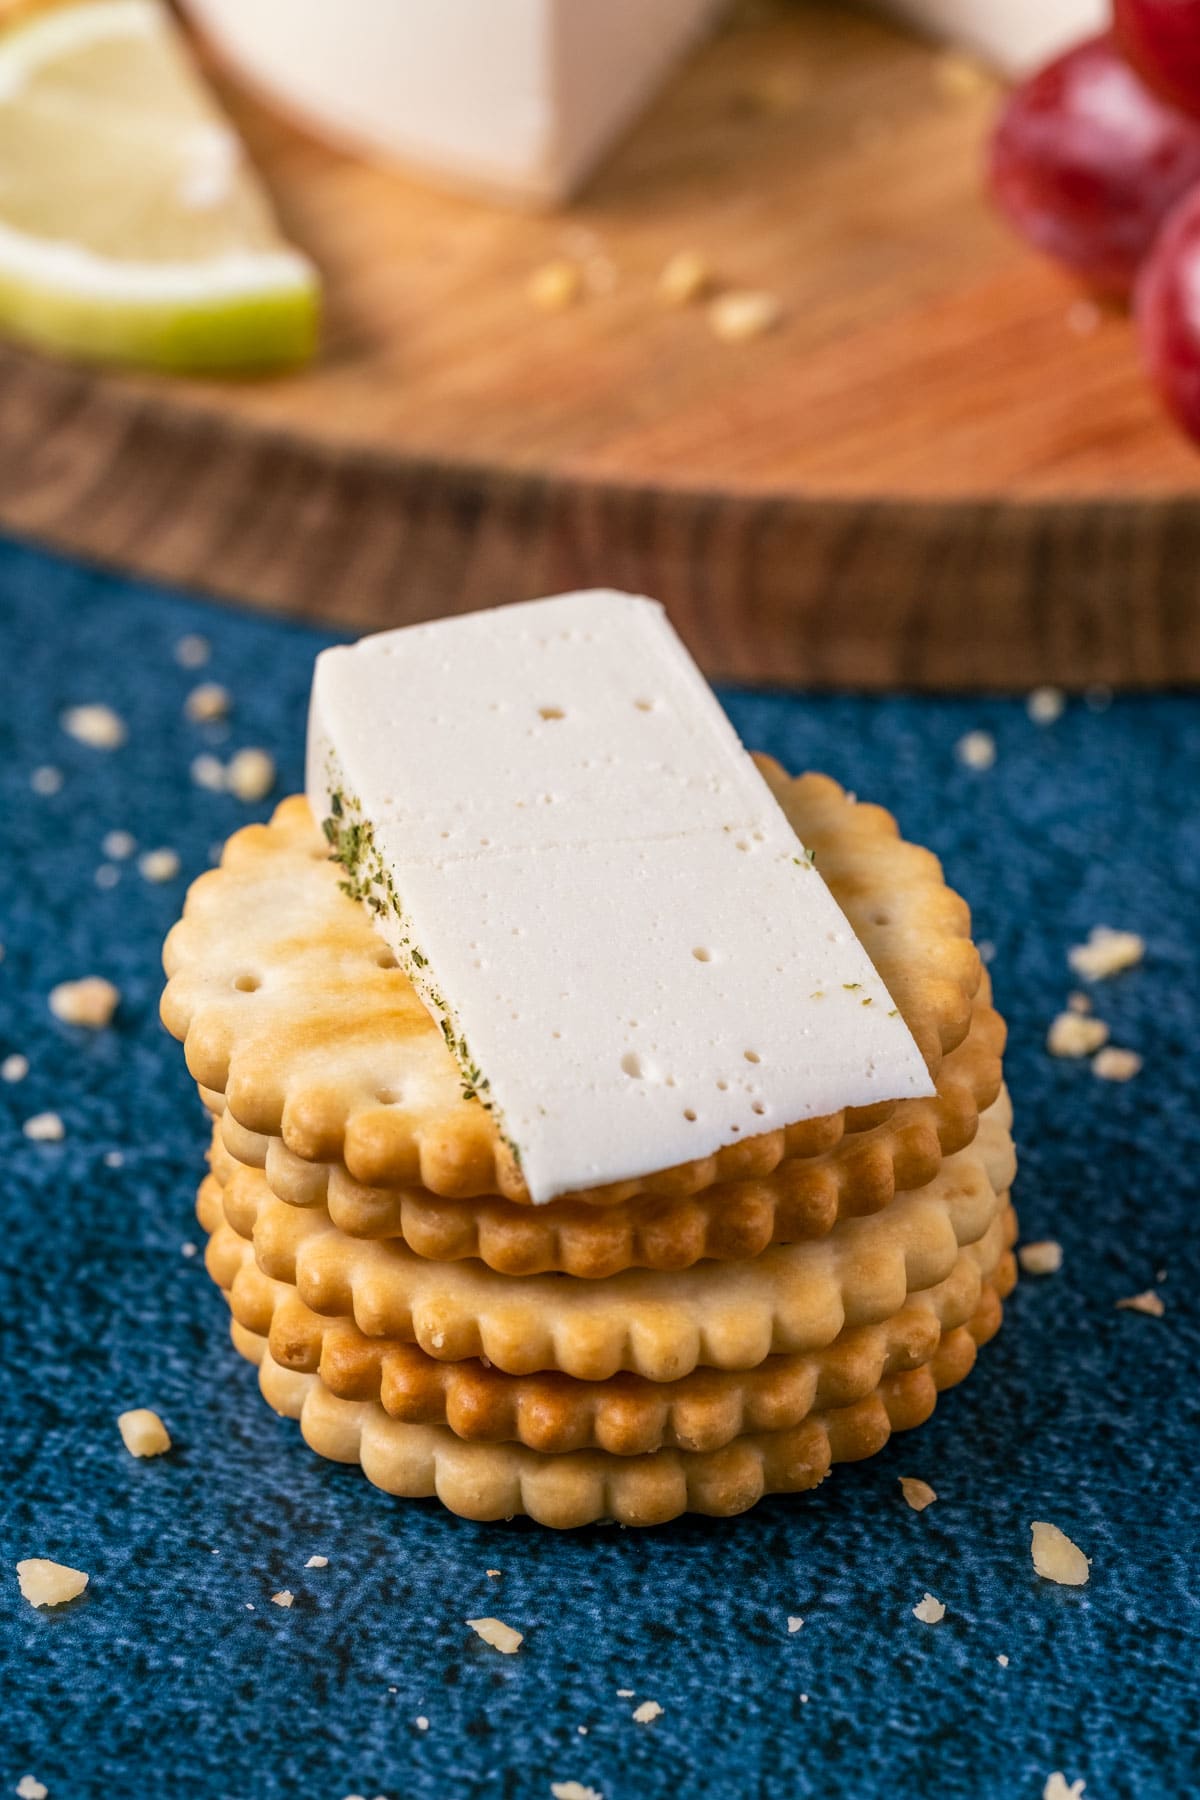 Slice of vegan goat cheese on a stack of crackers.